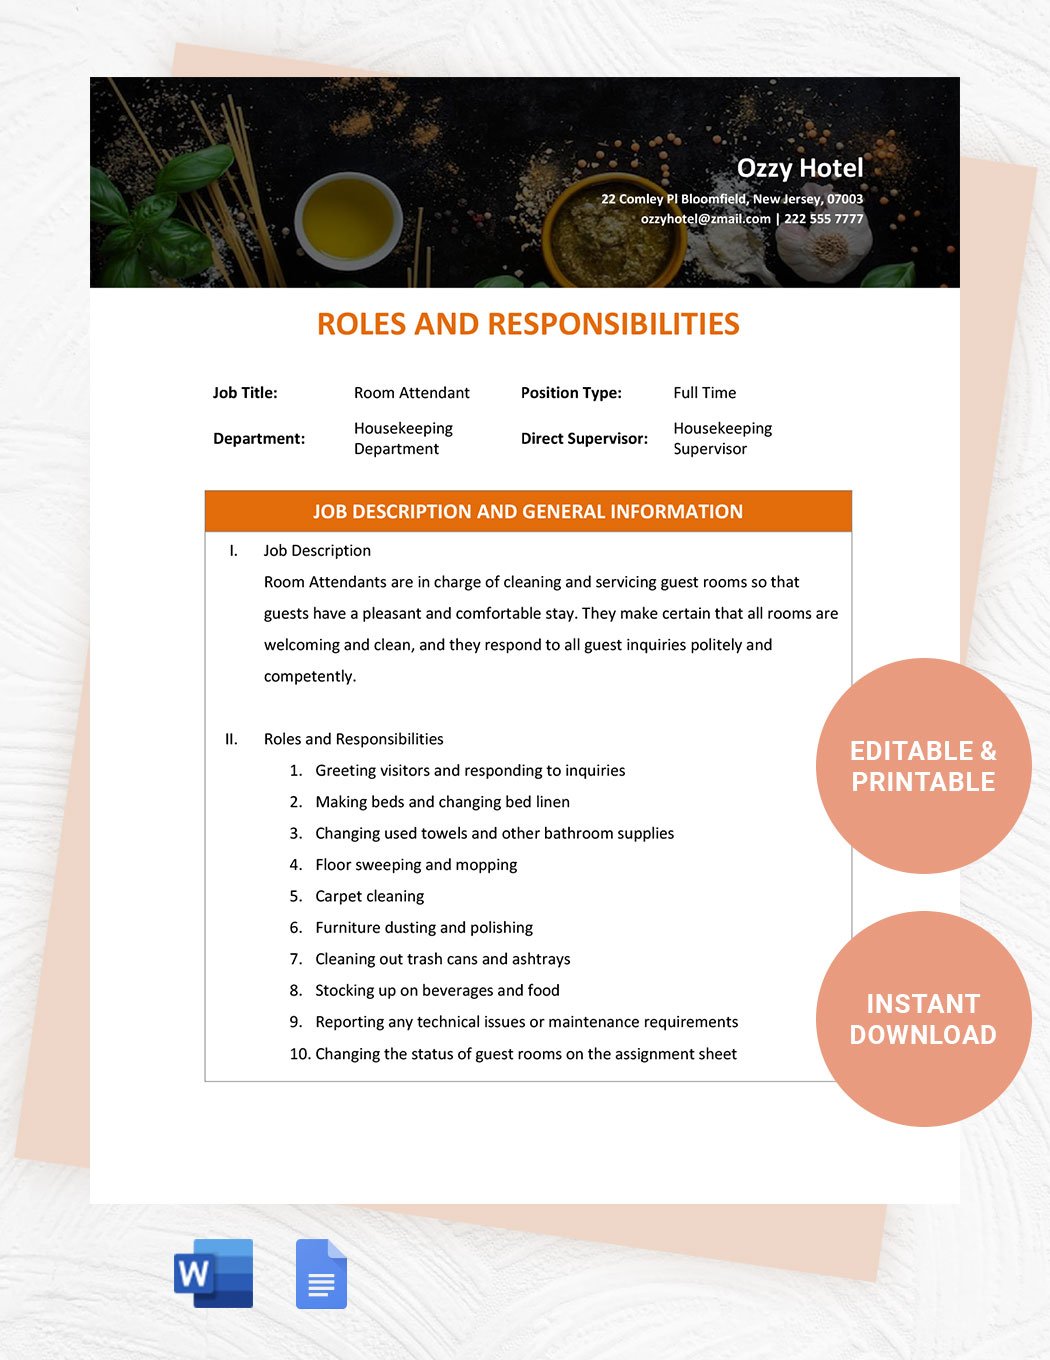 Free Staff Roles And Responsibilities Template in Word, Google Docs